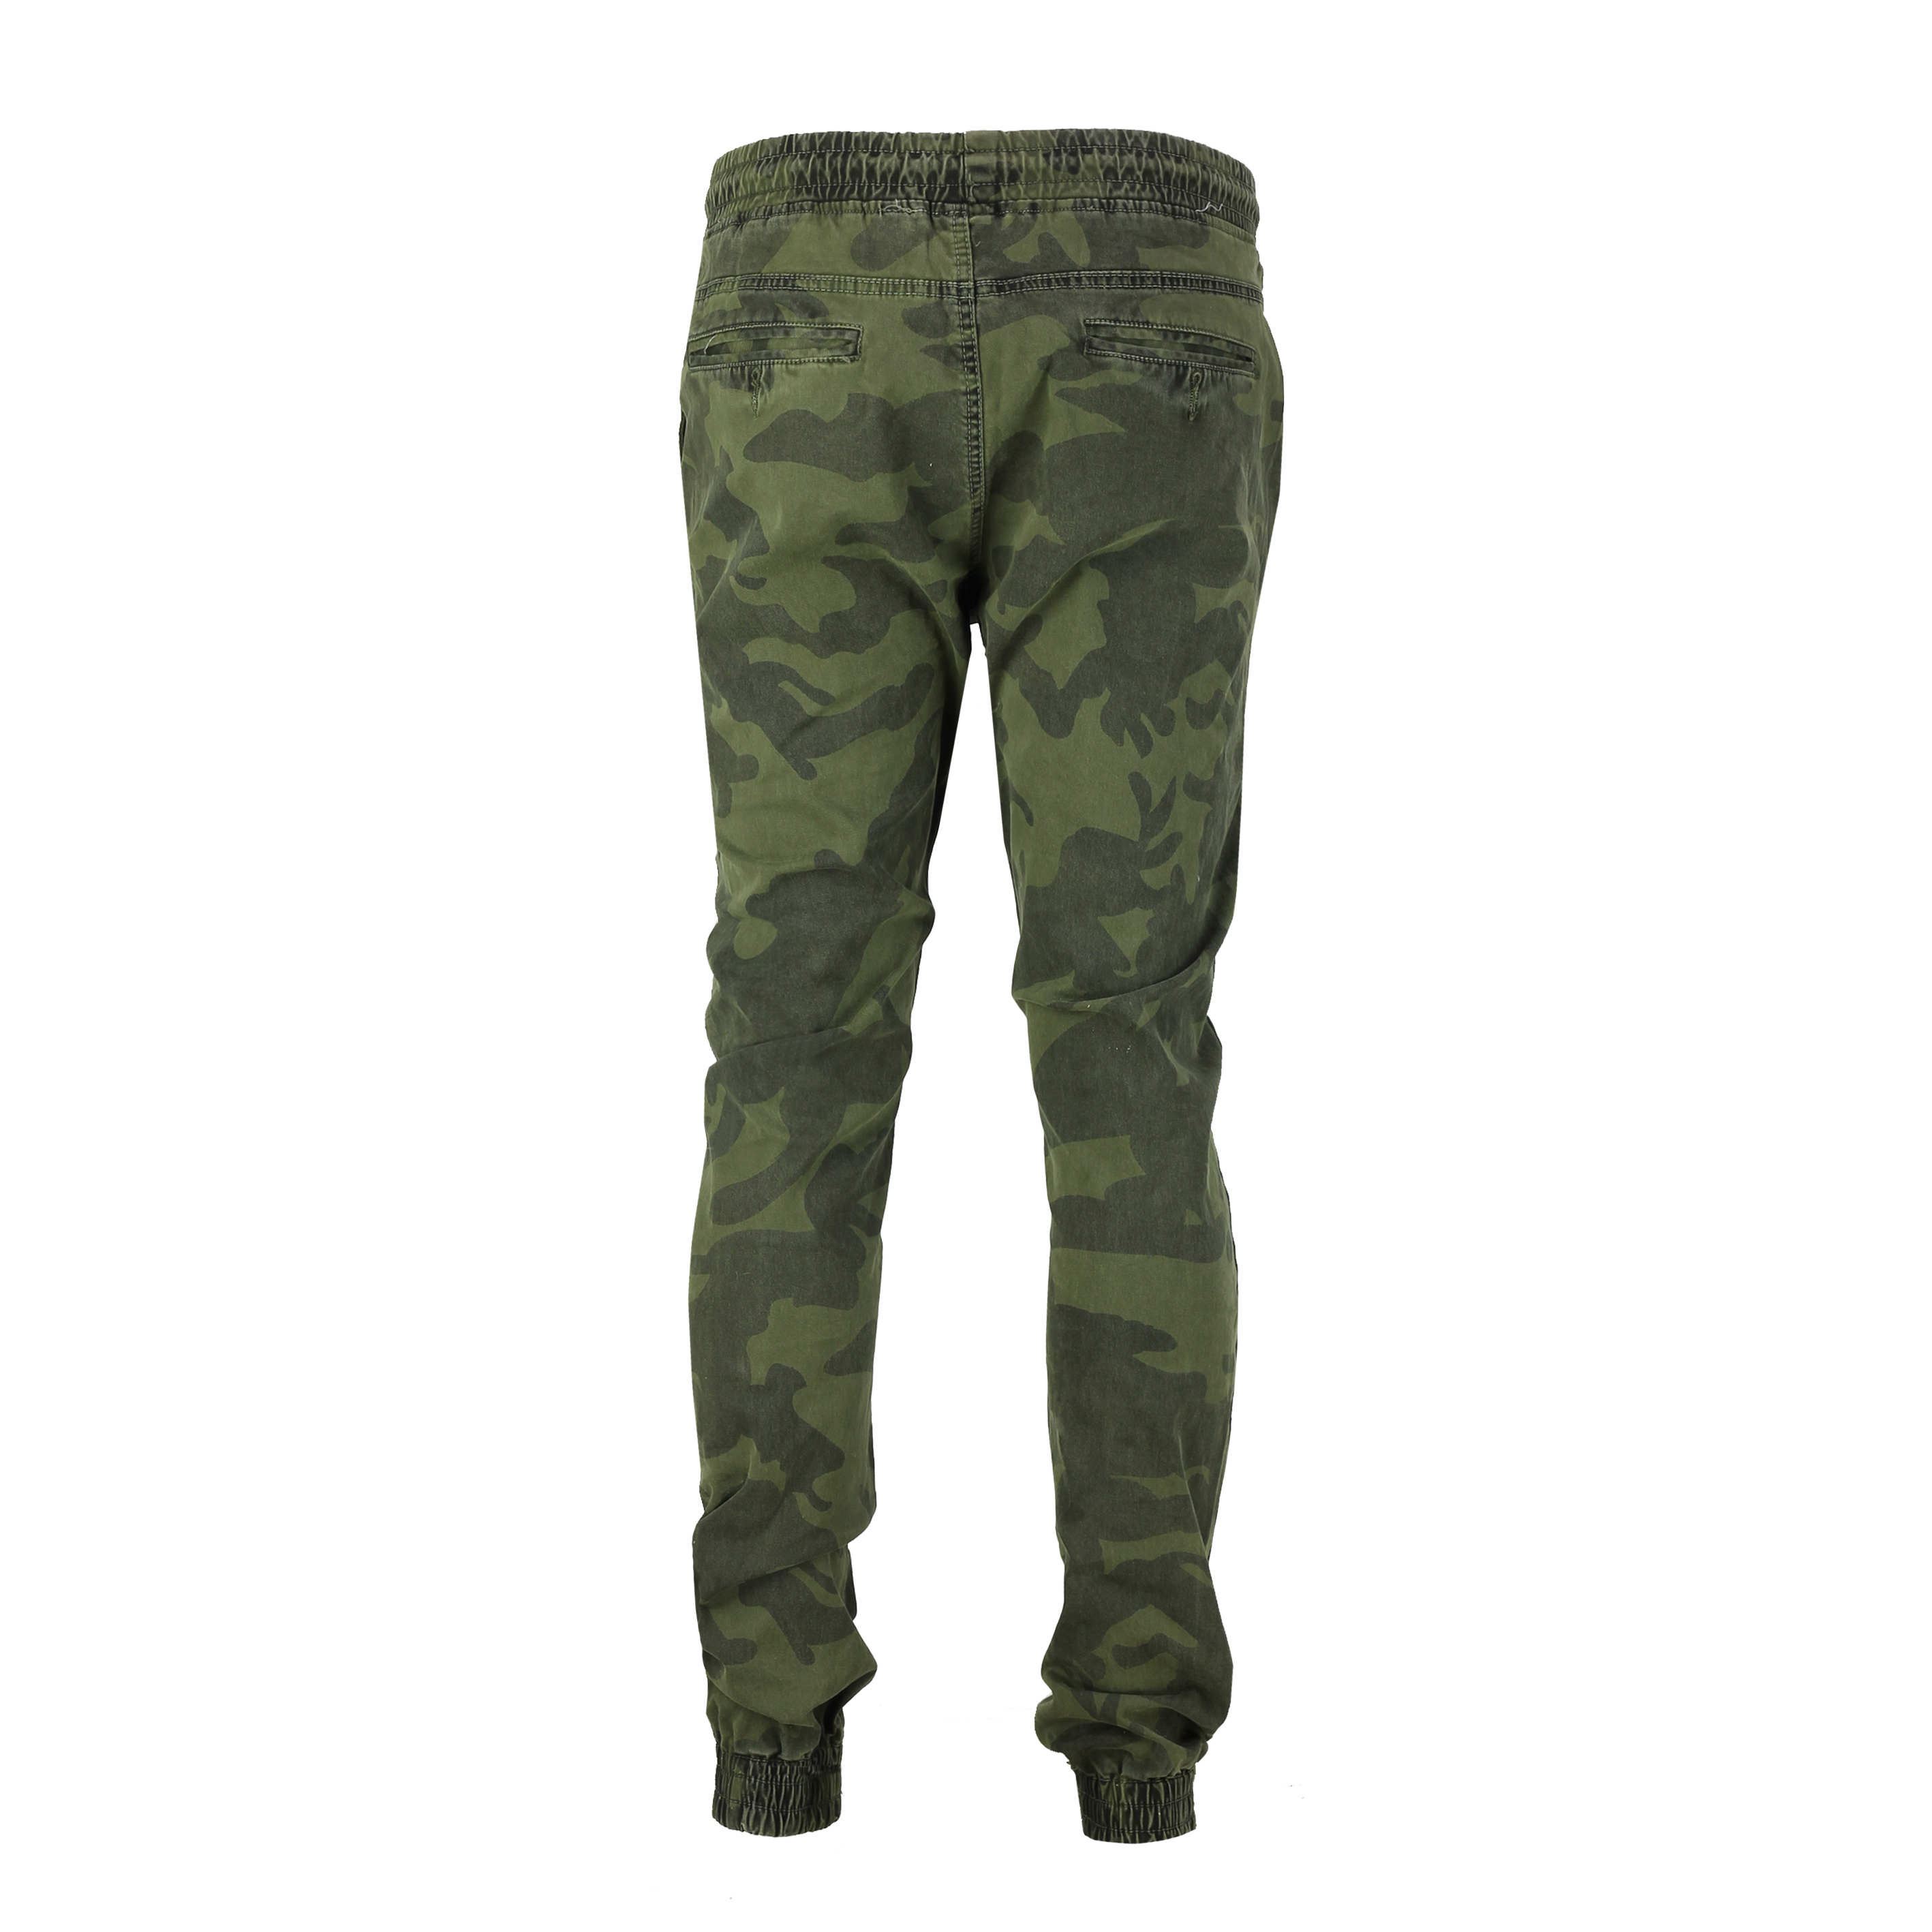 Mens Combat Military Ripped Trousers Camouflage Cargo Army Work Pants ...